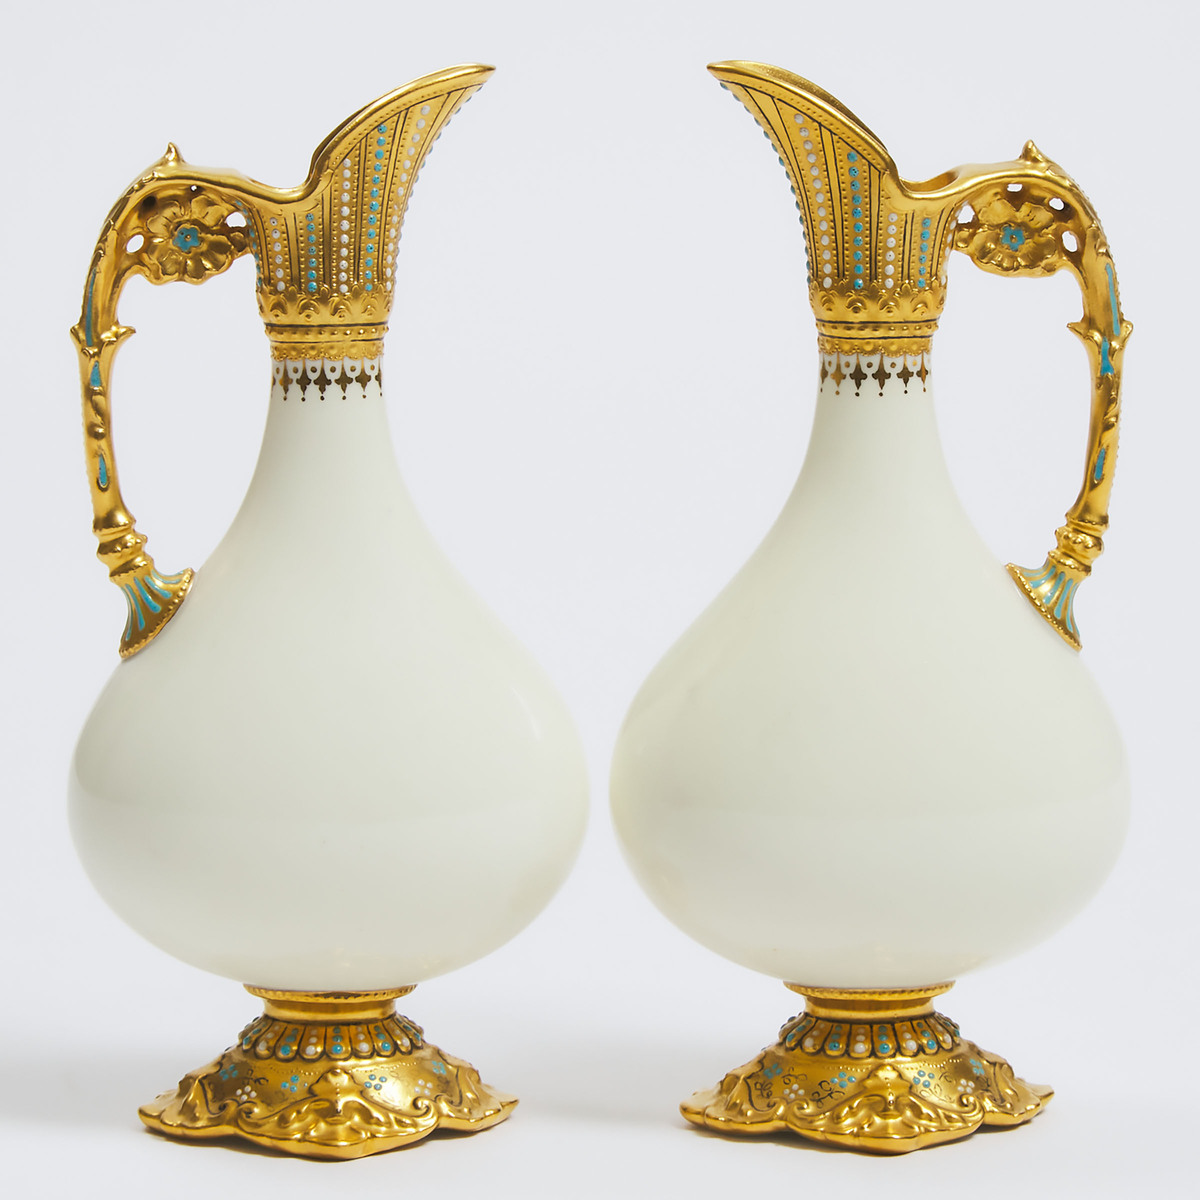 Pair of Royal Crown Derby 'Jeweled' Cabinet Ewers, 1937, height 6 in — 15.3 cm (2 Pieces)